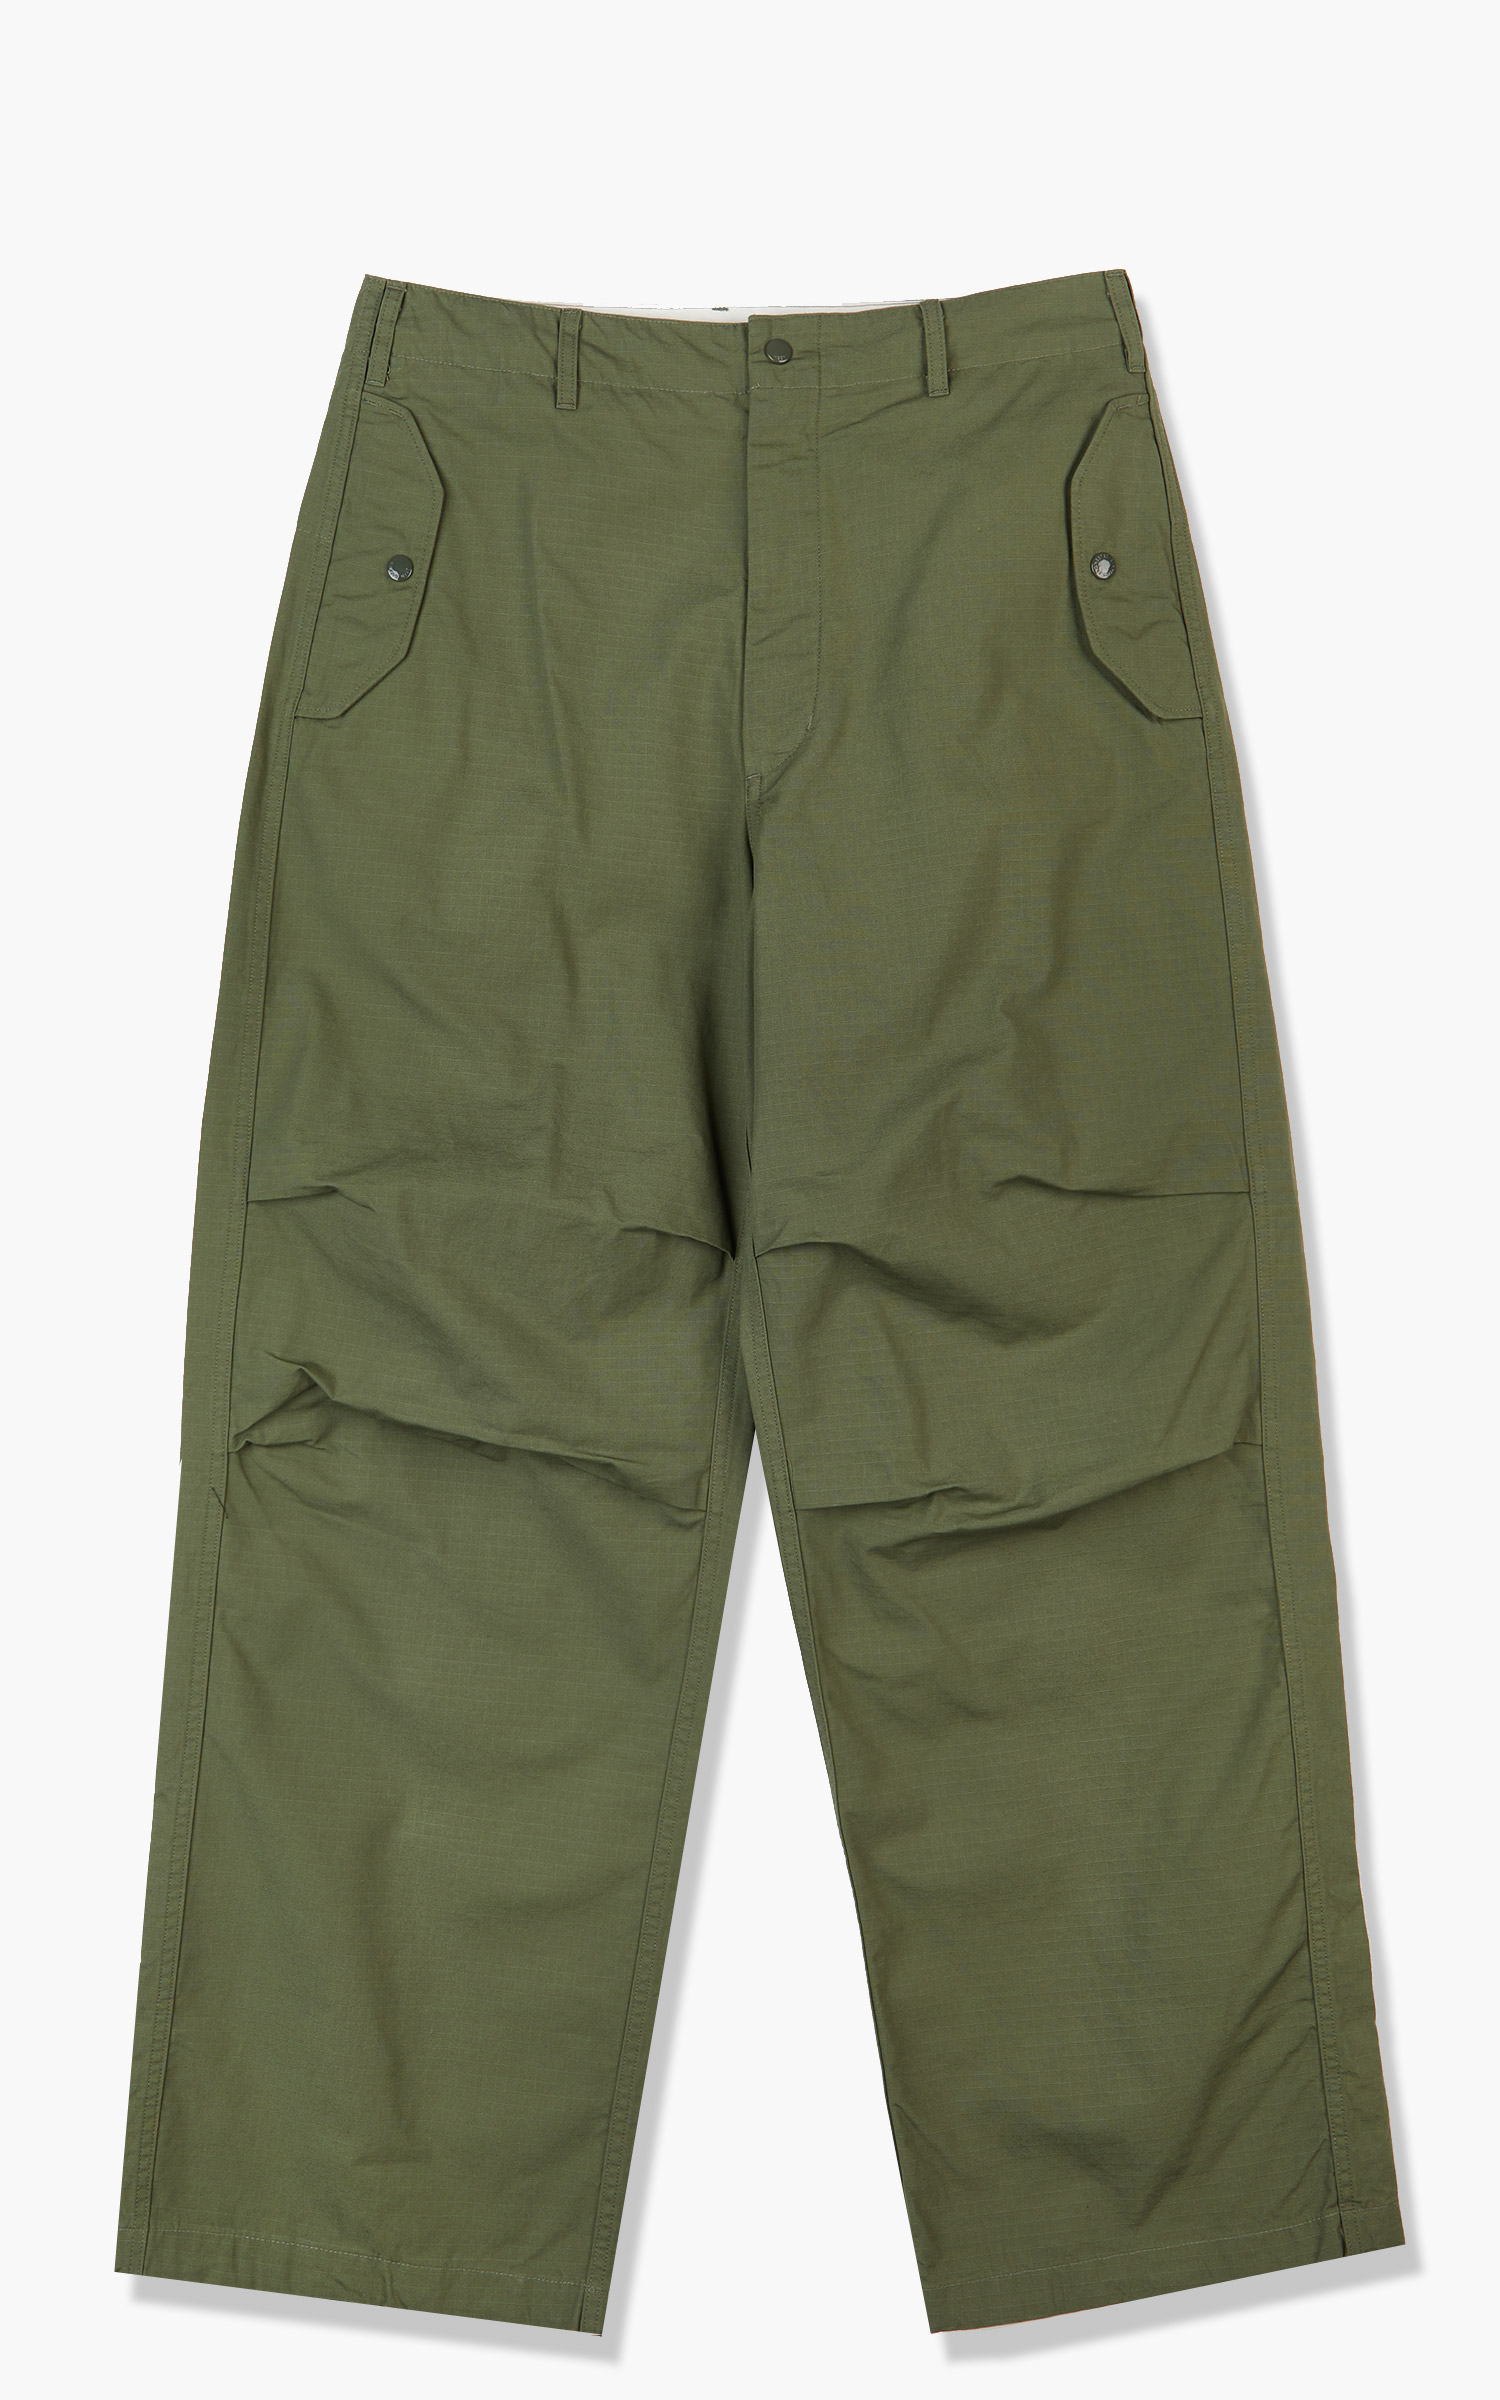 Engineered Garments Over Pant Cotton Ripstop Olive